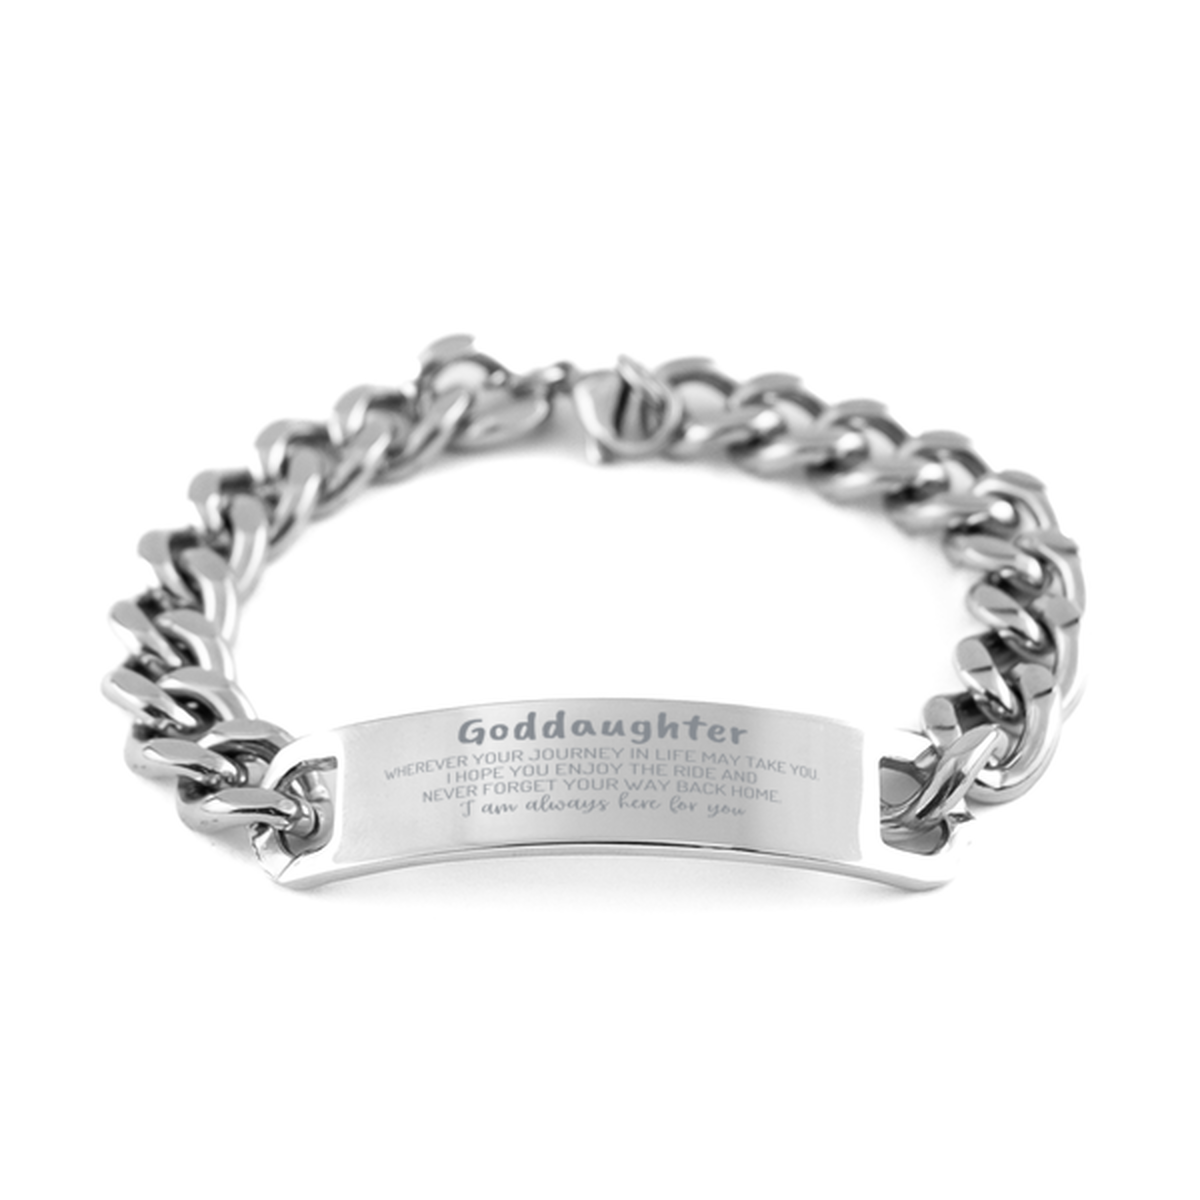 Goddaughter wherever your journey in life may take you, I am always here for you Goddaughter Cuban Chain Stainless Steel Bracelet, Awesome Christmas Gifts For Goddaughter, Goddaughter Birthday Gifts for Men Women Family Loved One